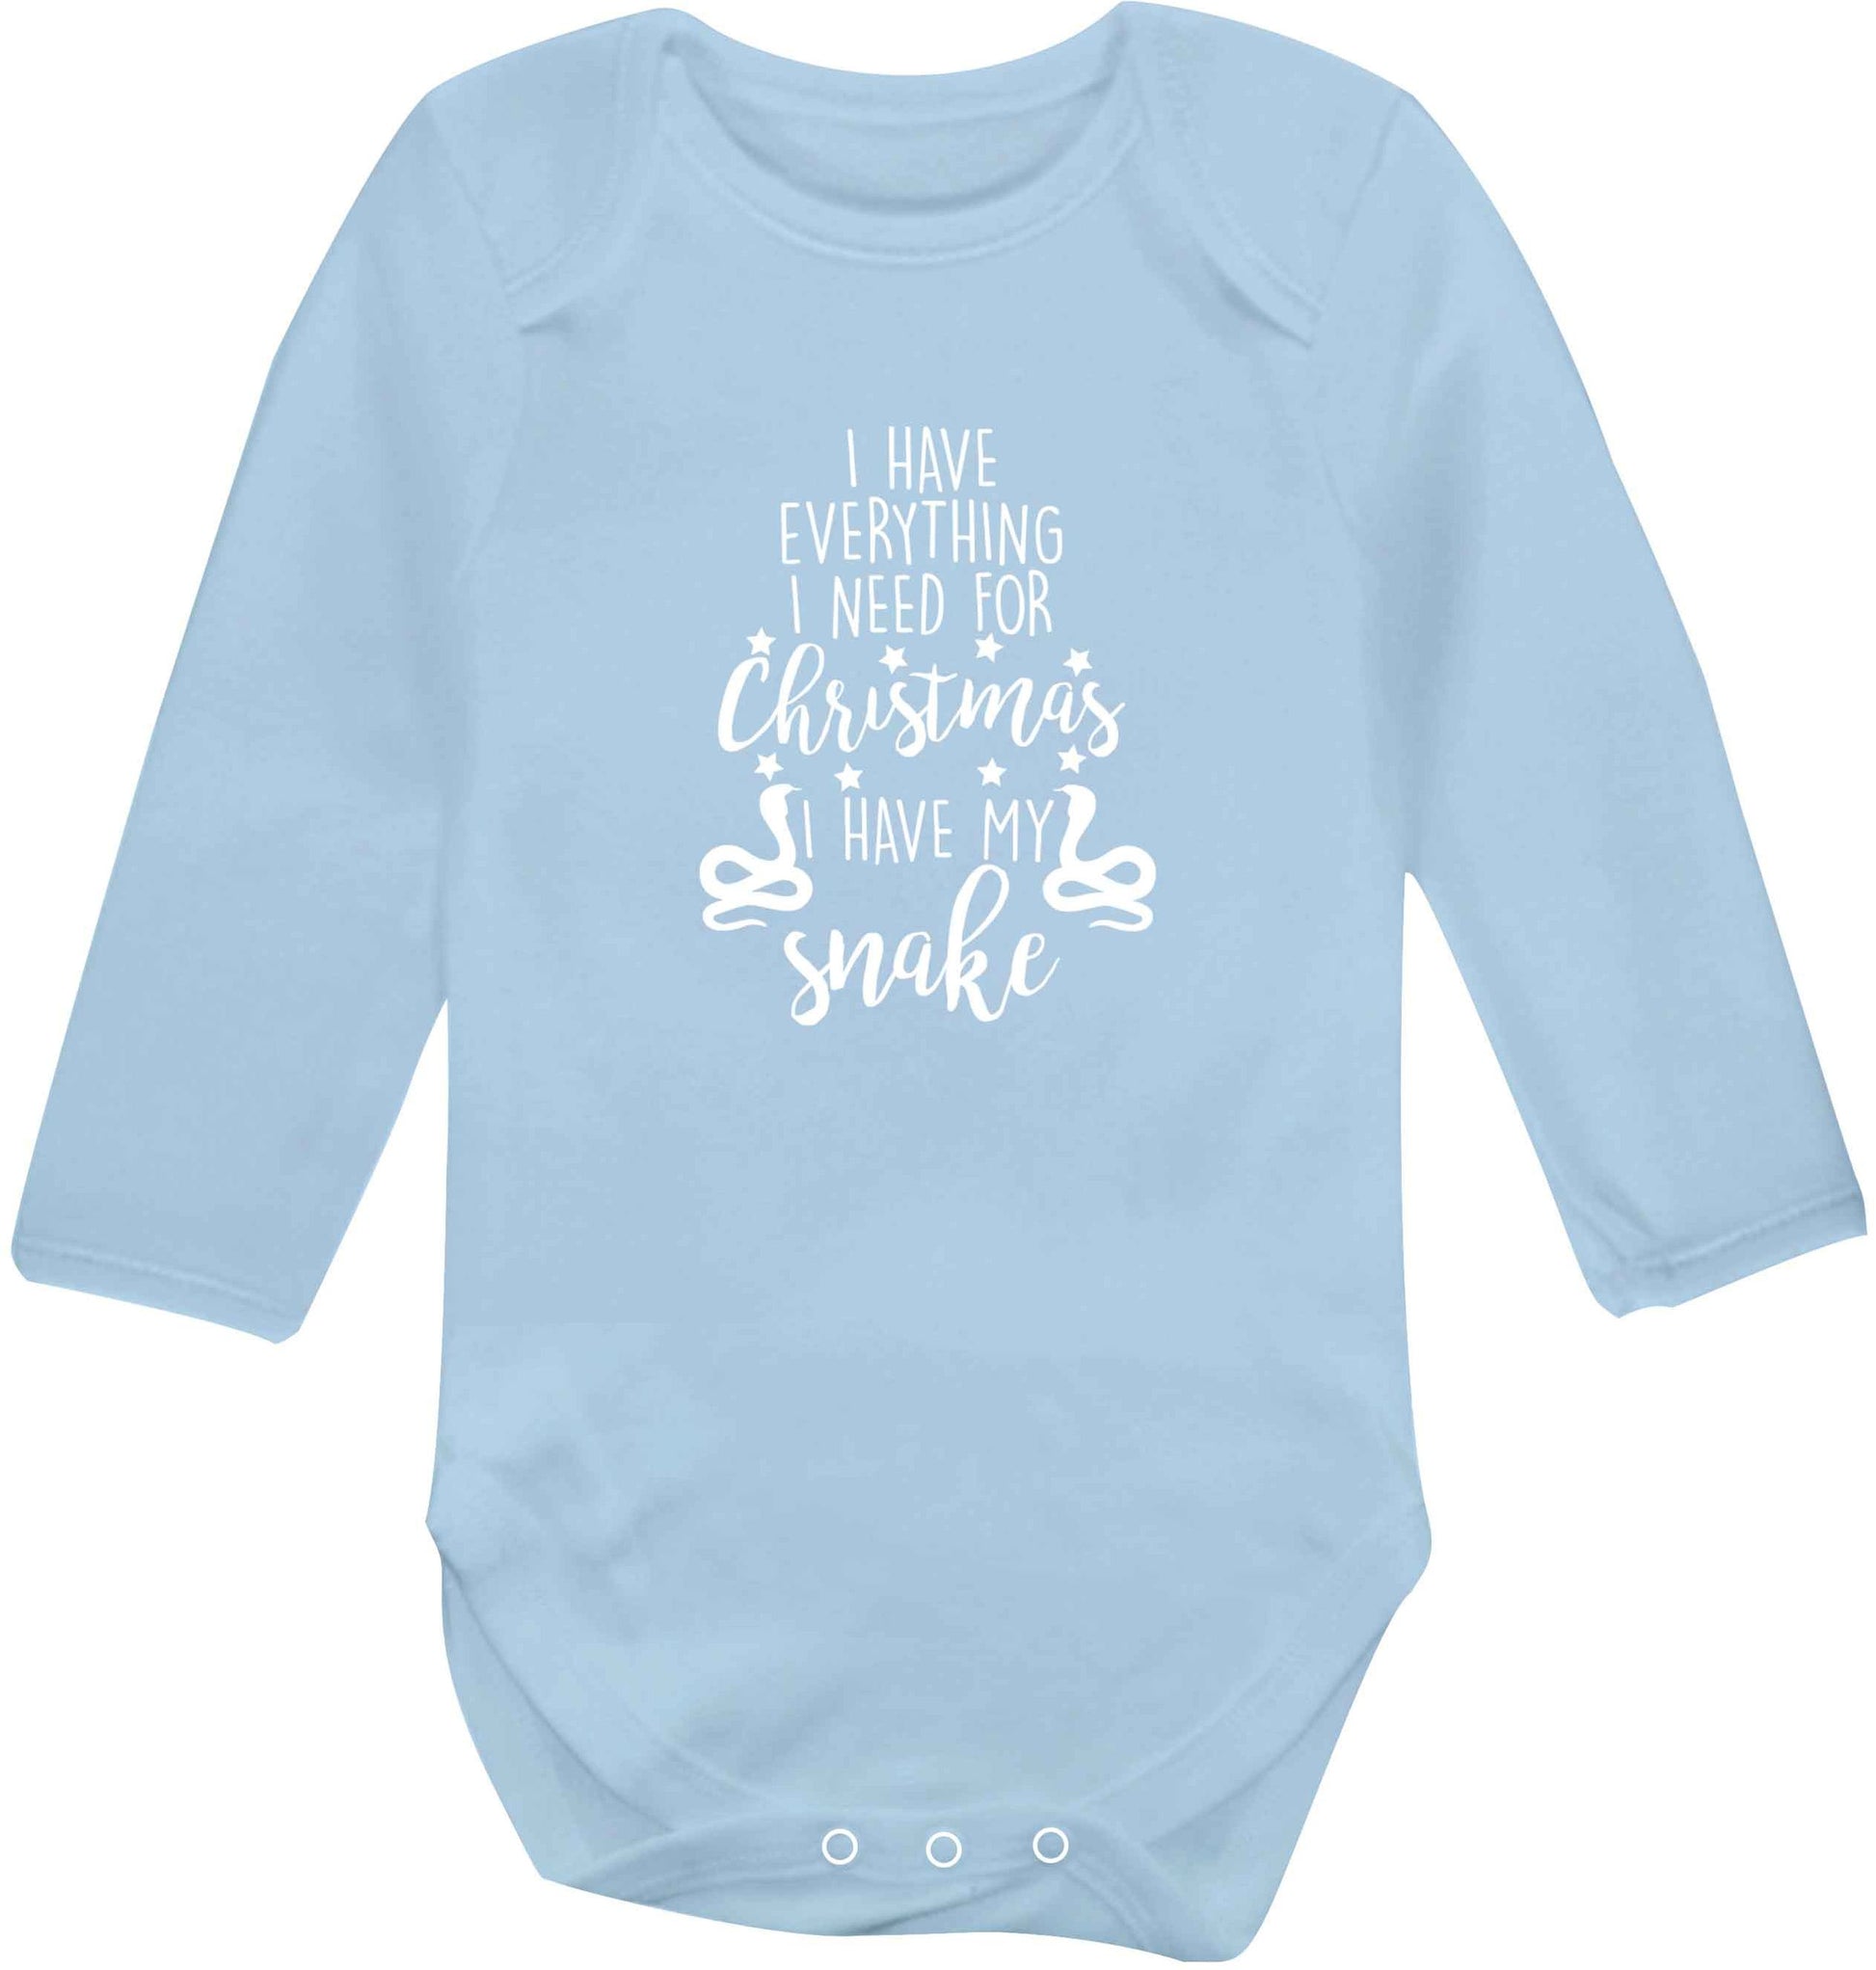 I have everything I need for Christmas I have my snake baby vest long sleeved pale blue 6-12 months